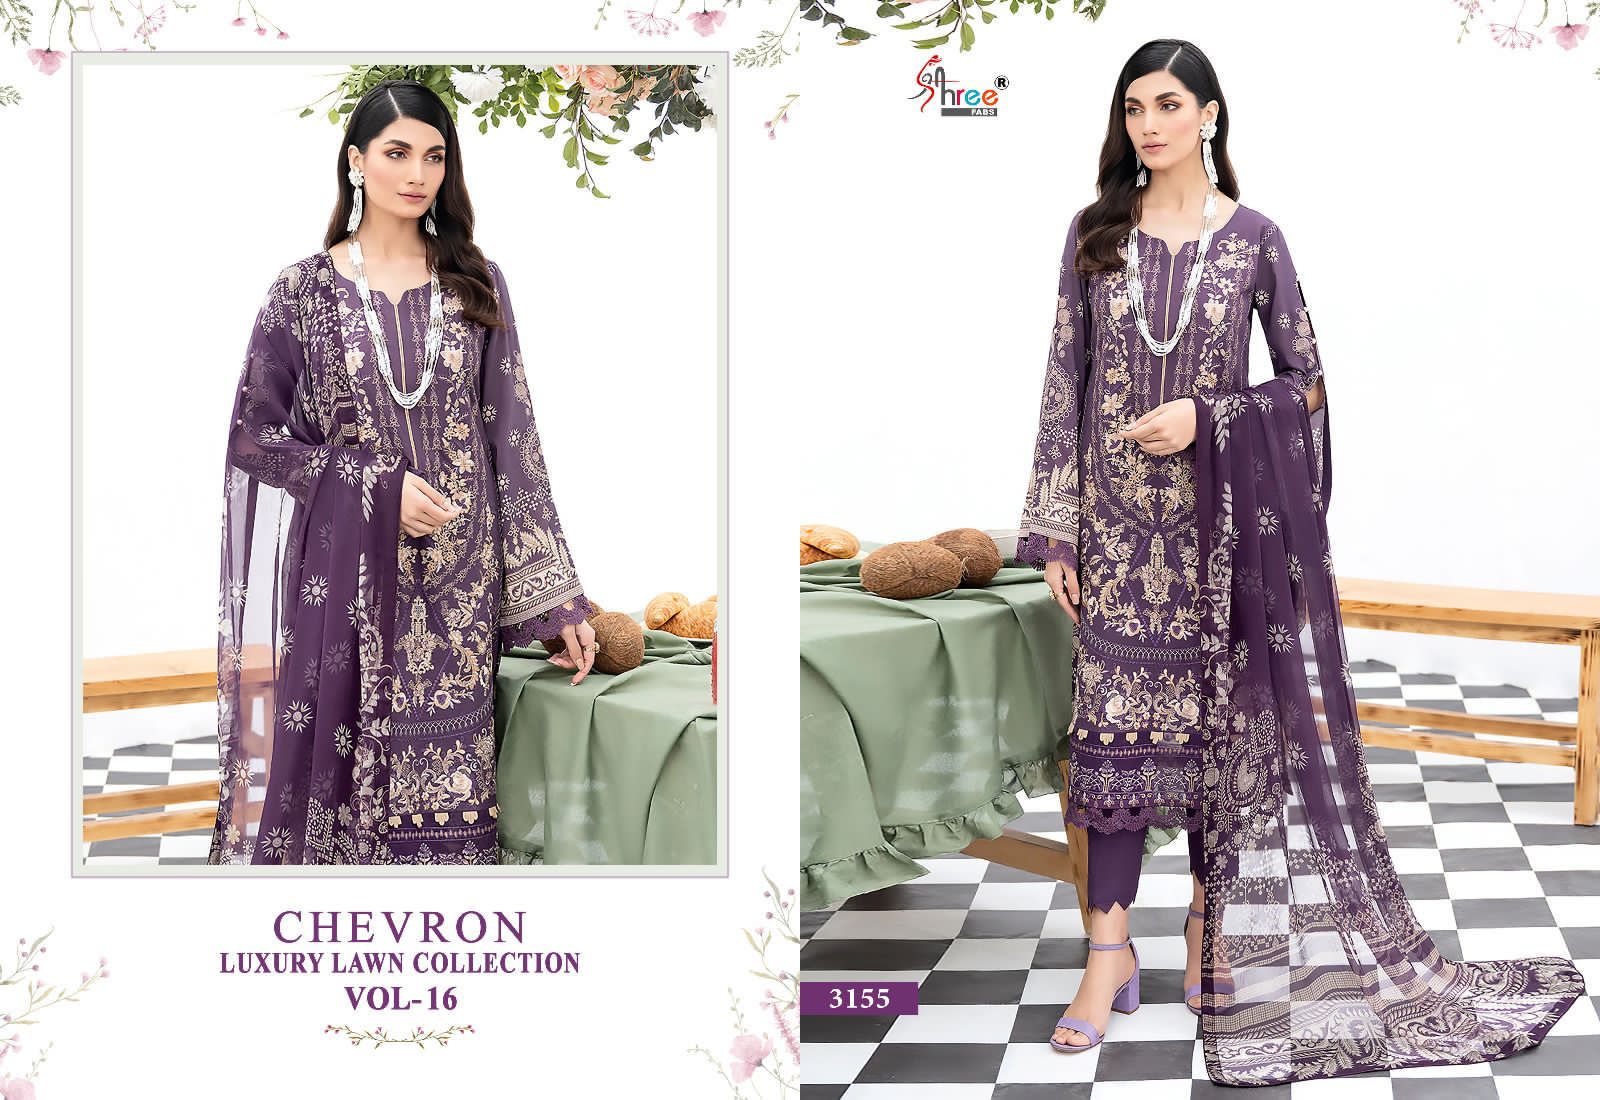 Shree Chevron Luxury Lawn Collection Vol 16 collection 4